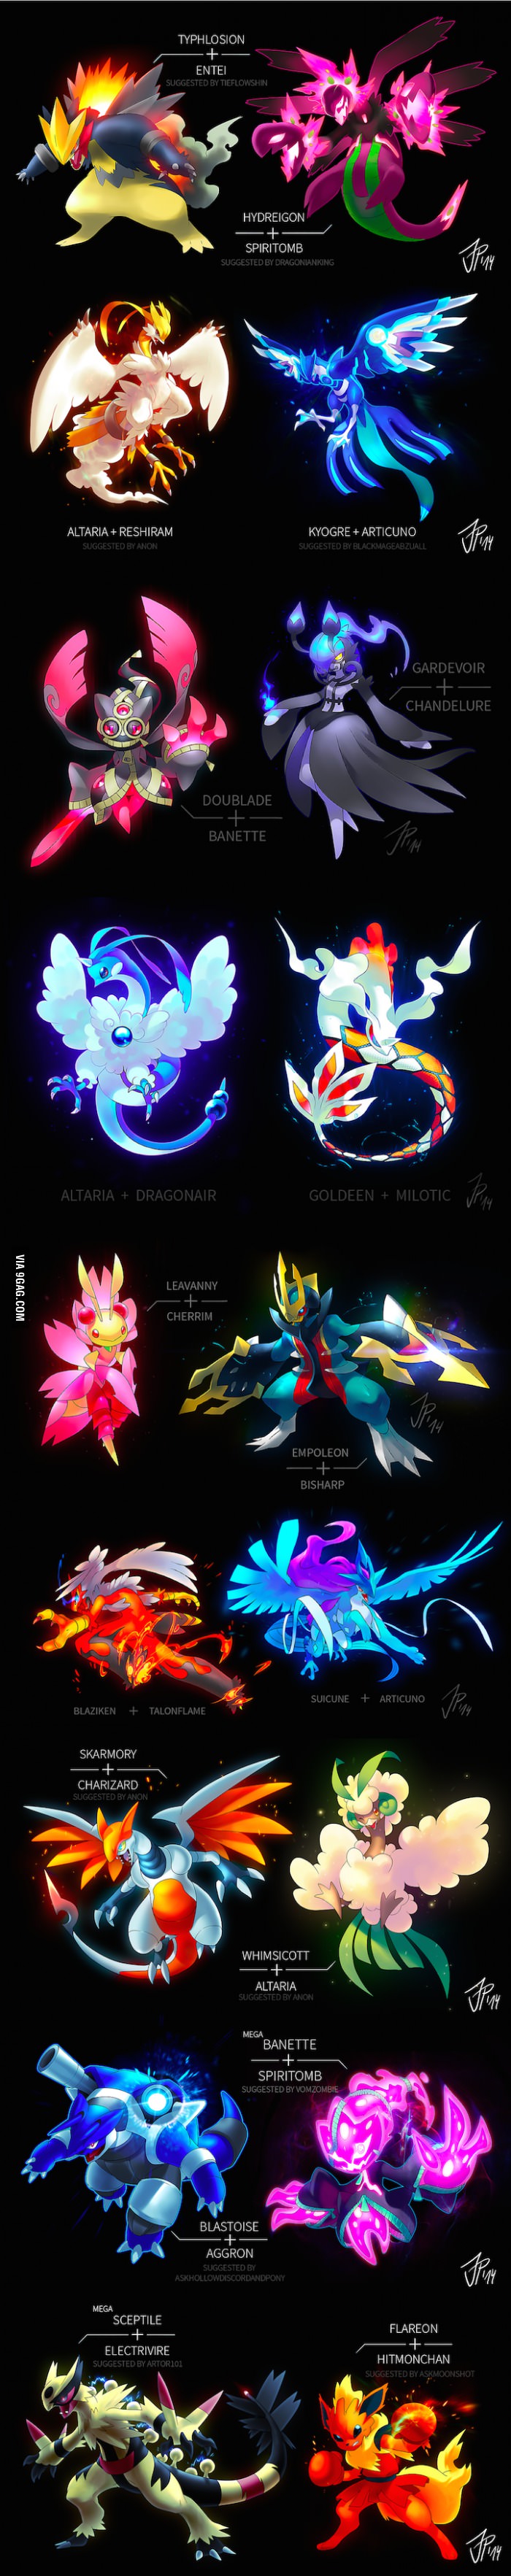 Pokemon Fusion as The Inspiration of Ascender's Animals